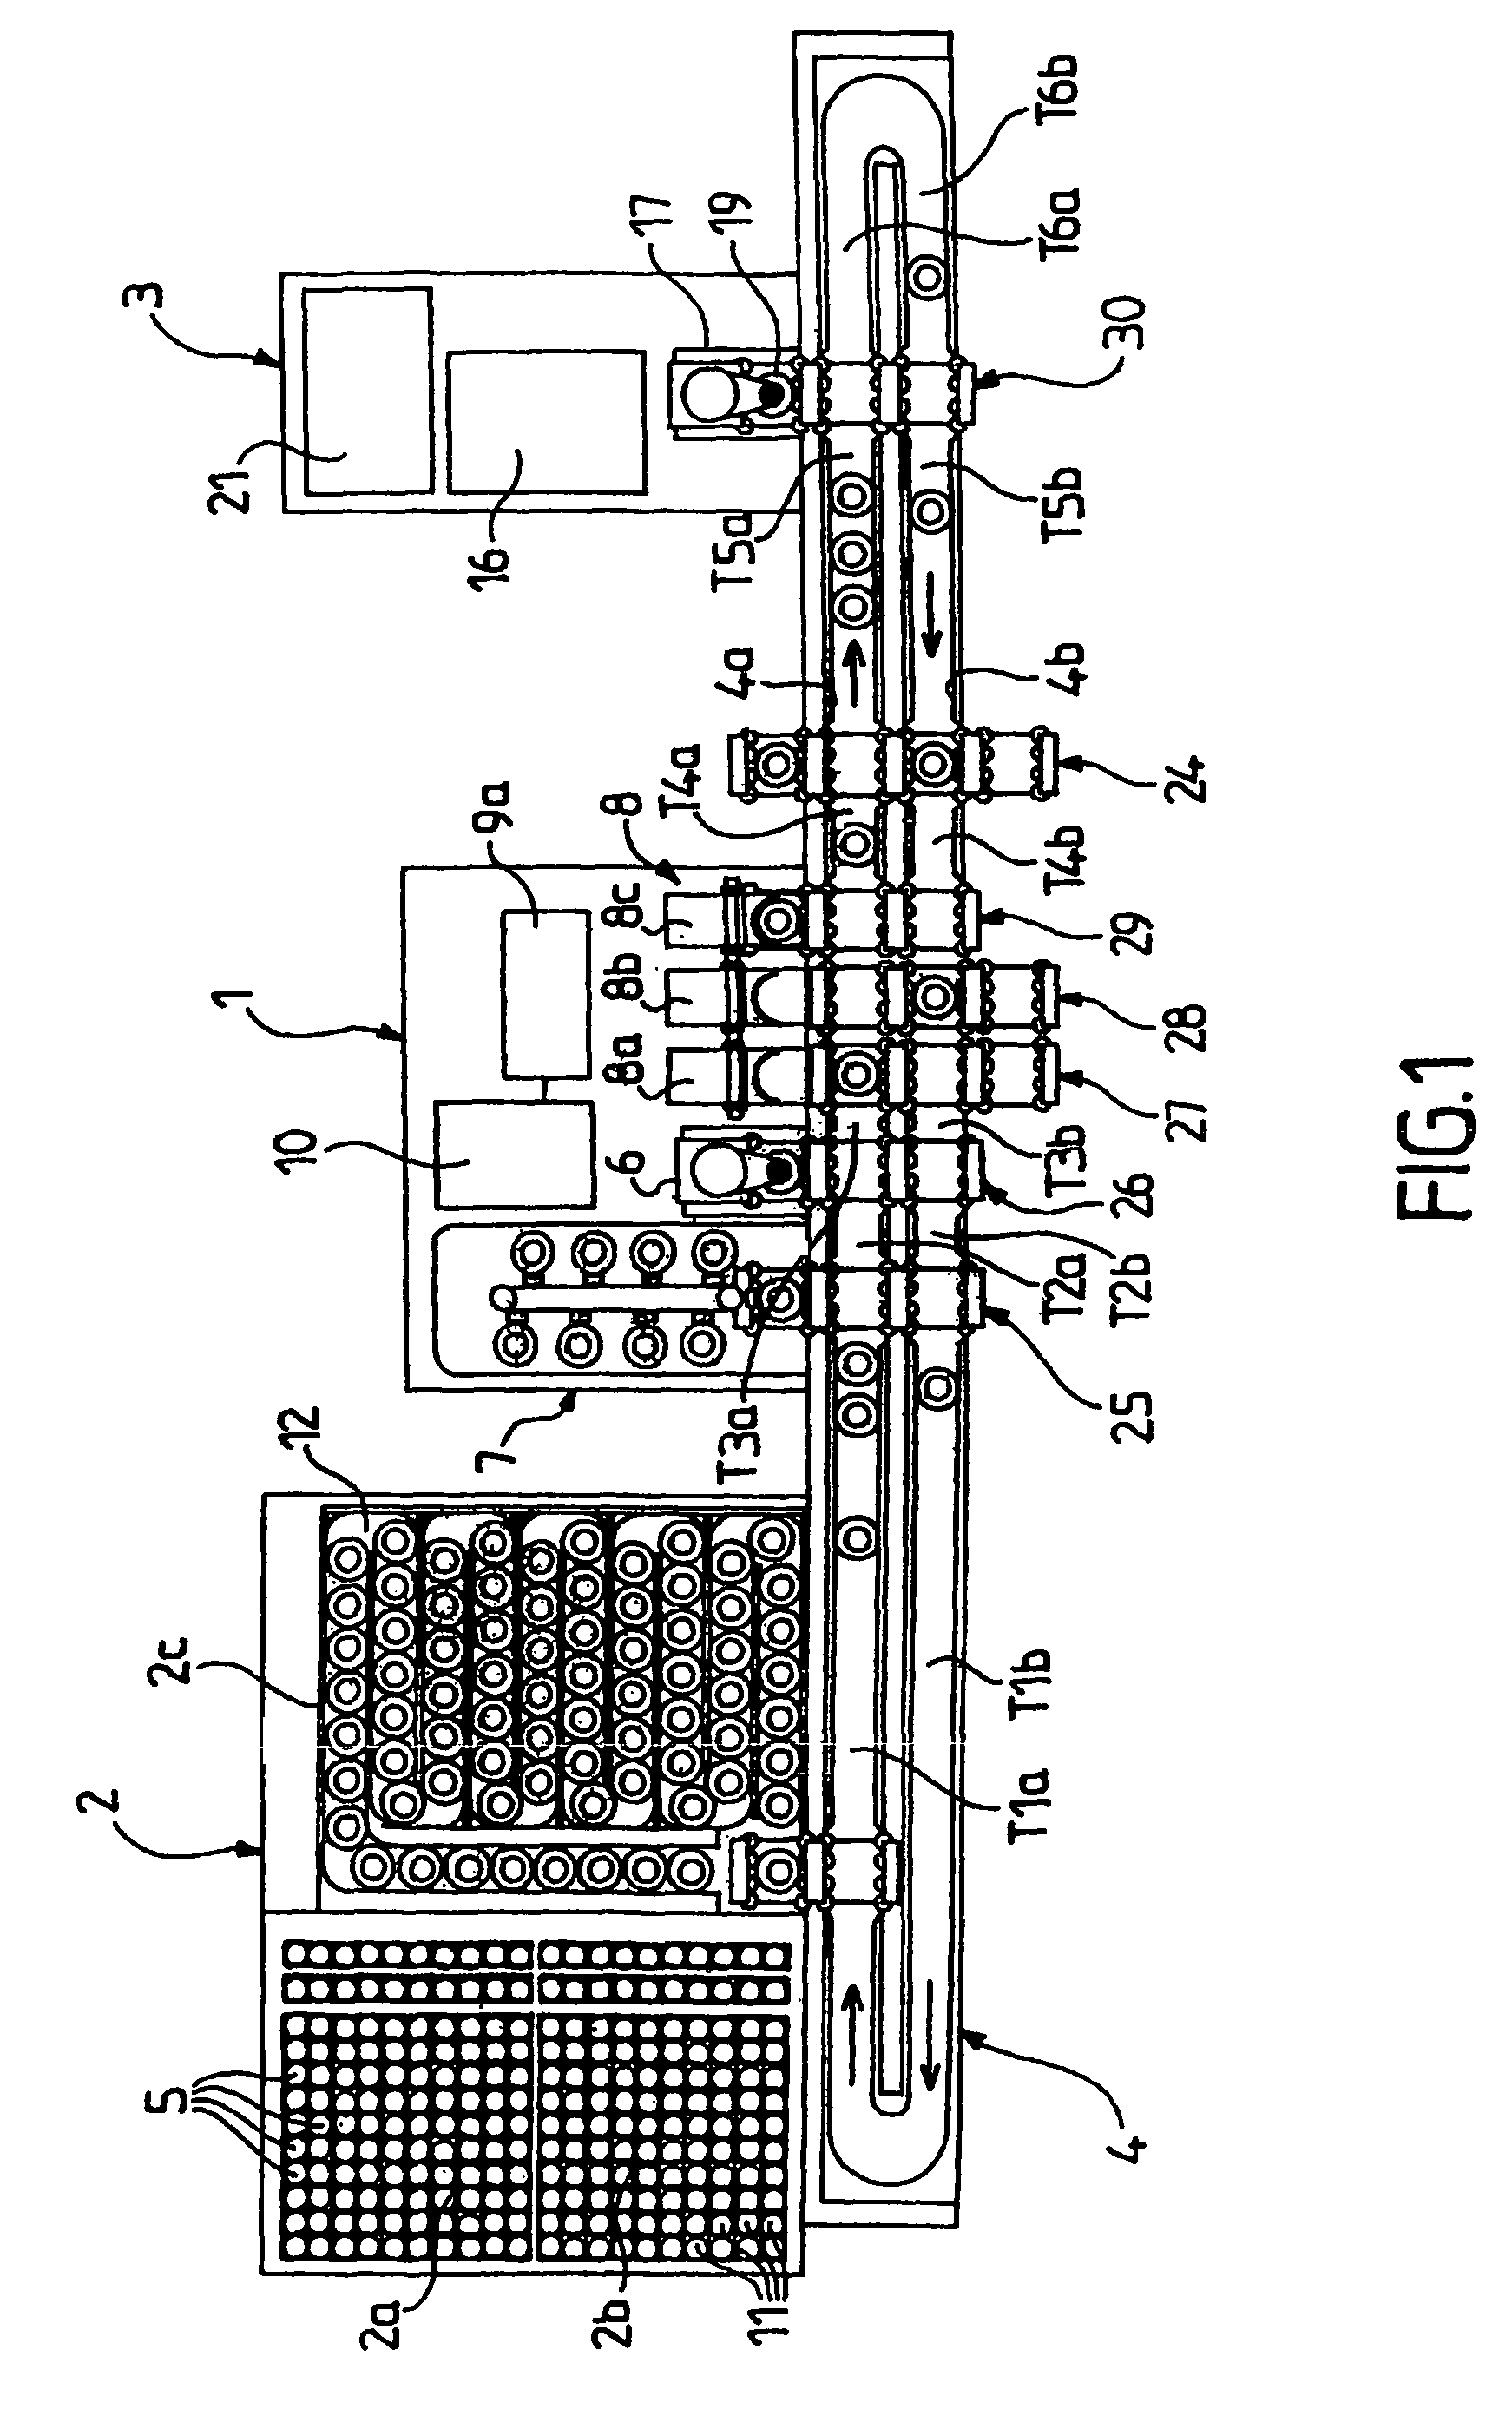 Device for supplying blood tubes to a whole blood analyser